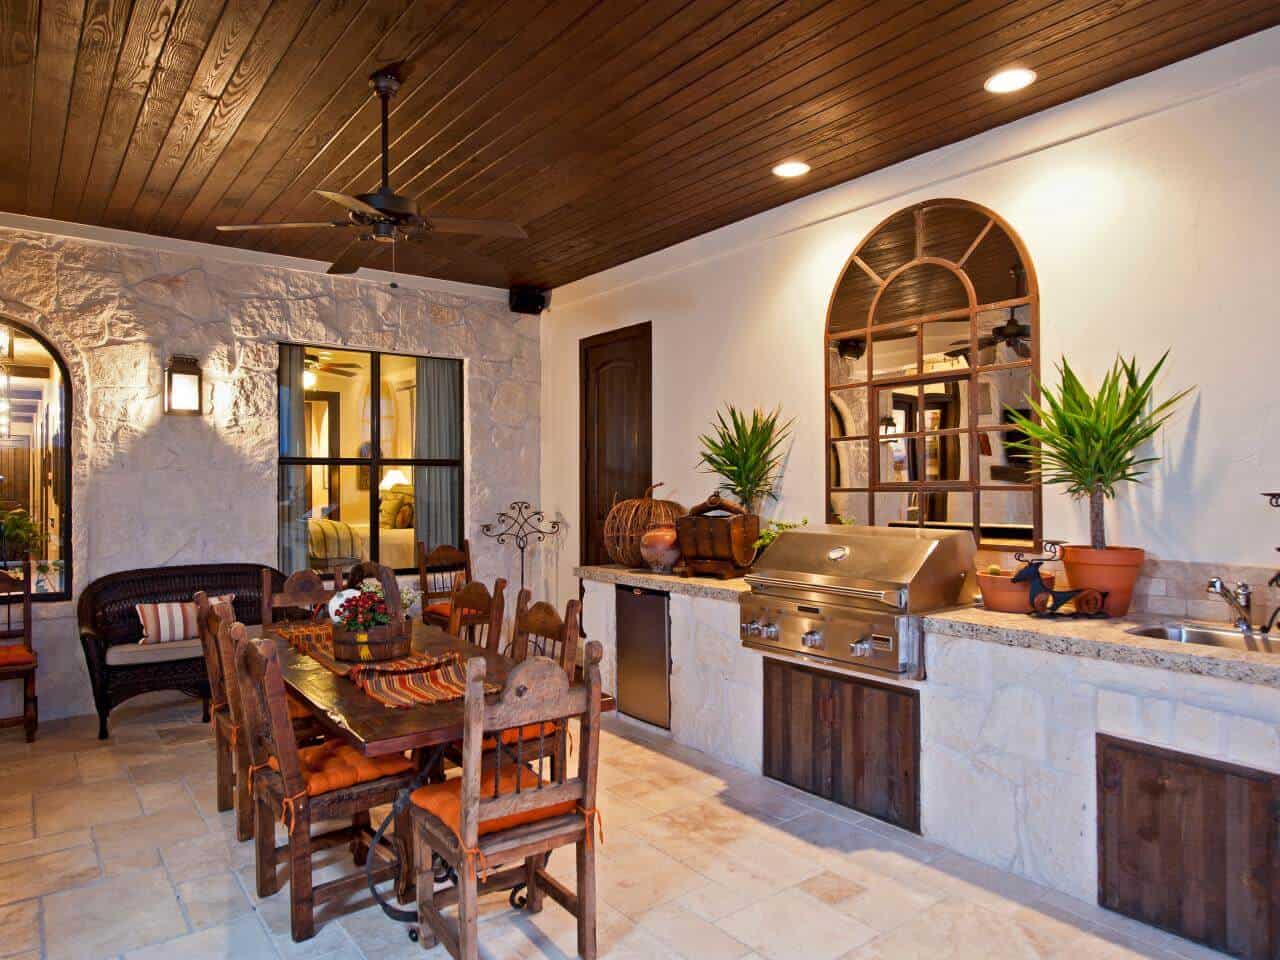 Rustic Spanish Kitchen And Dining Room